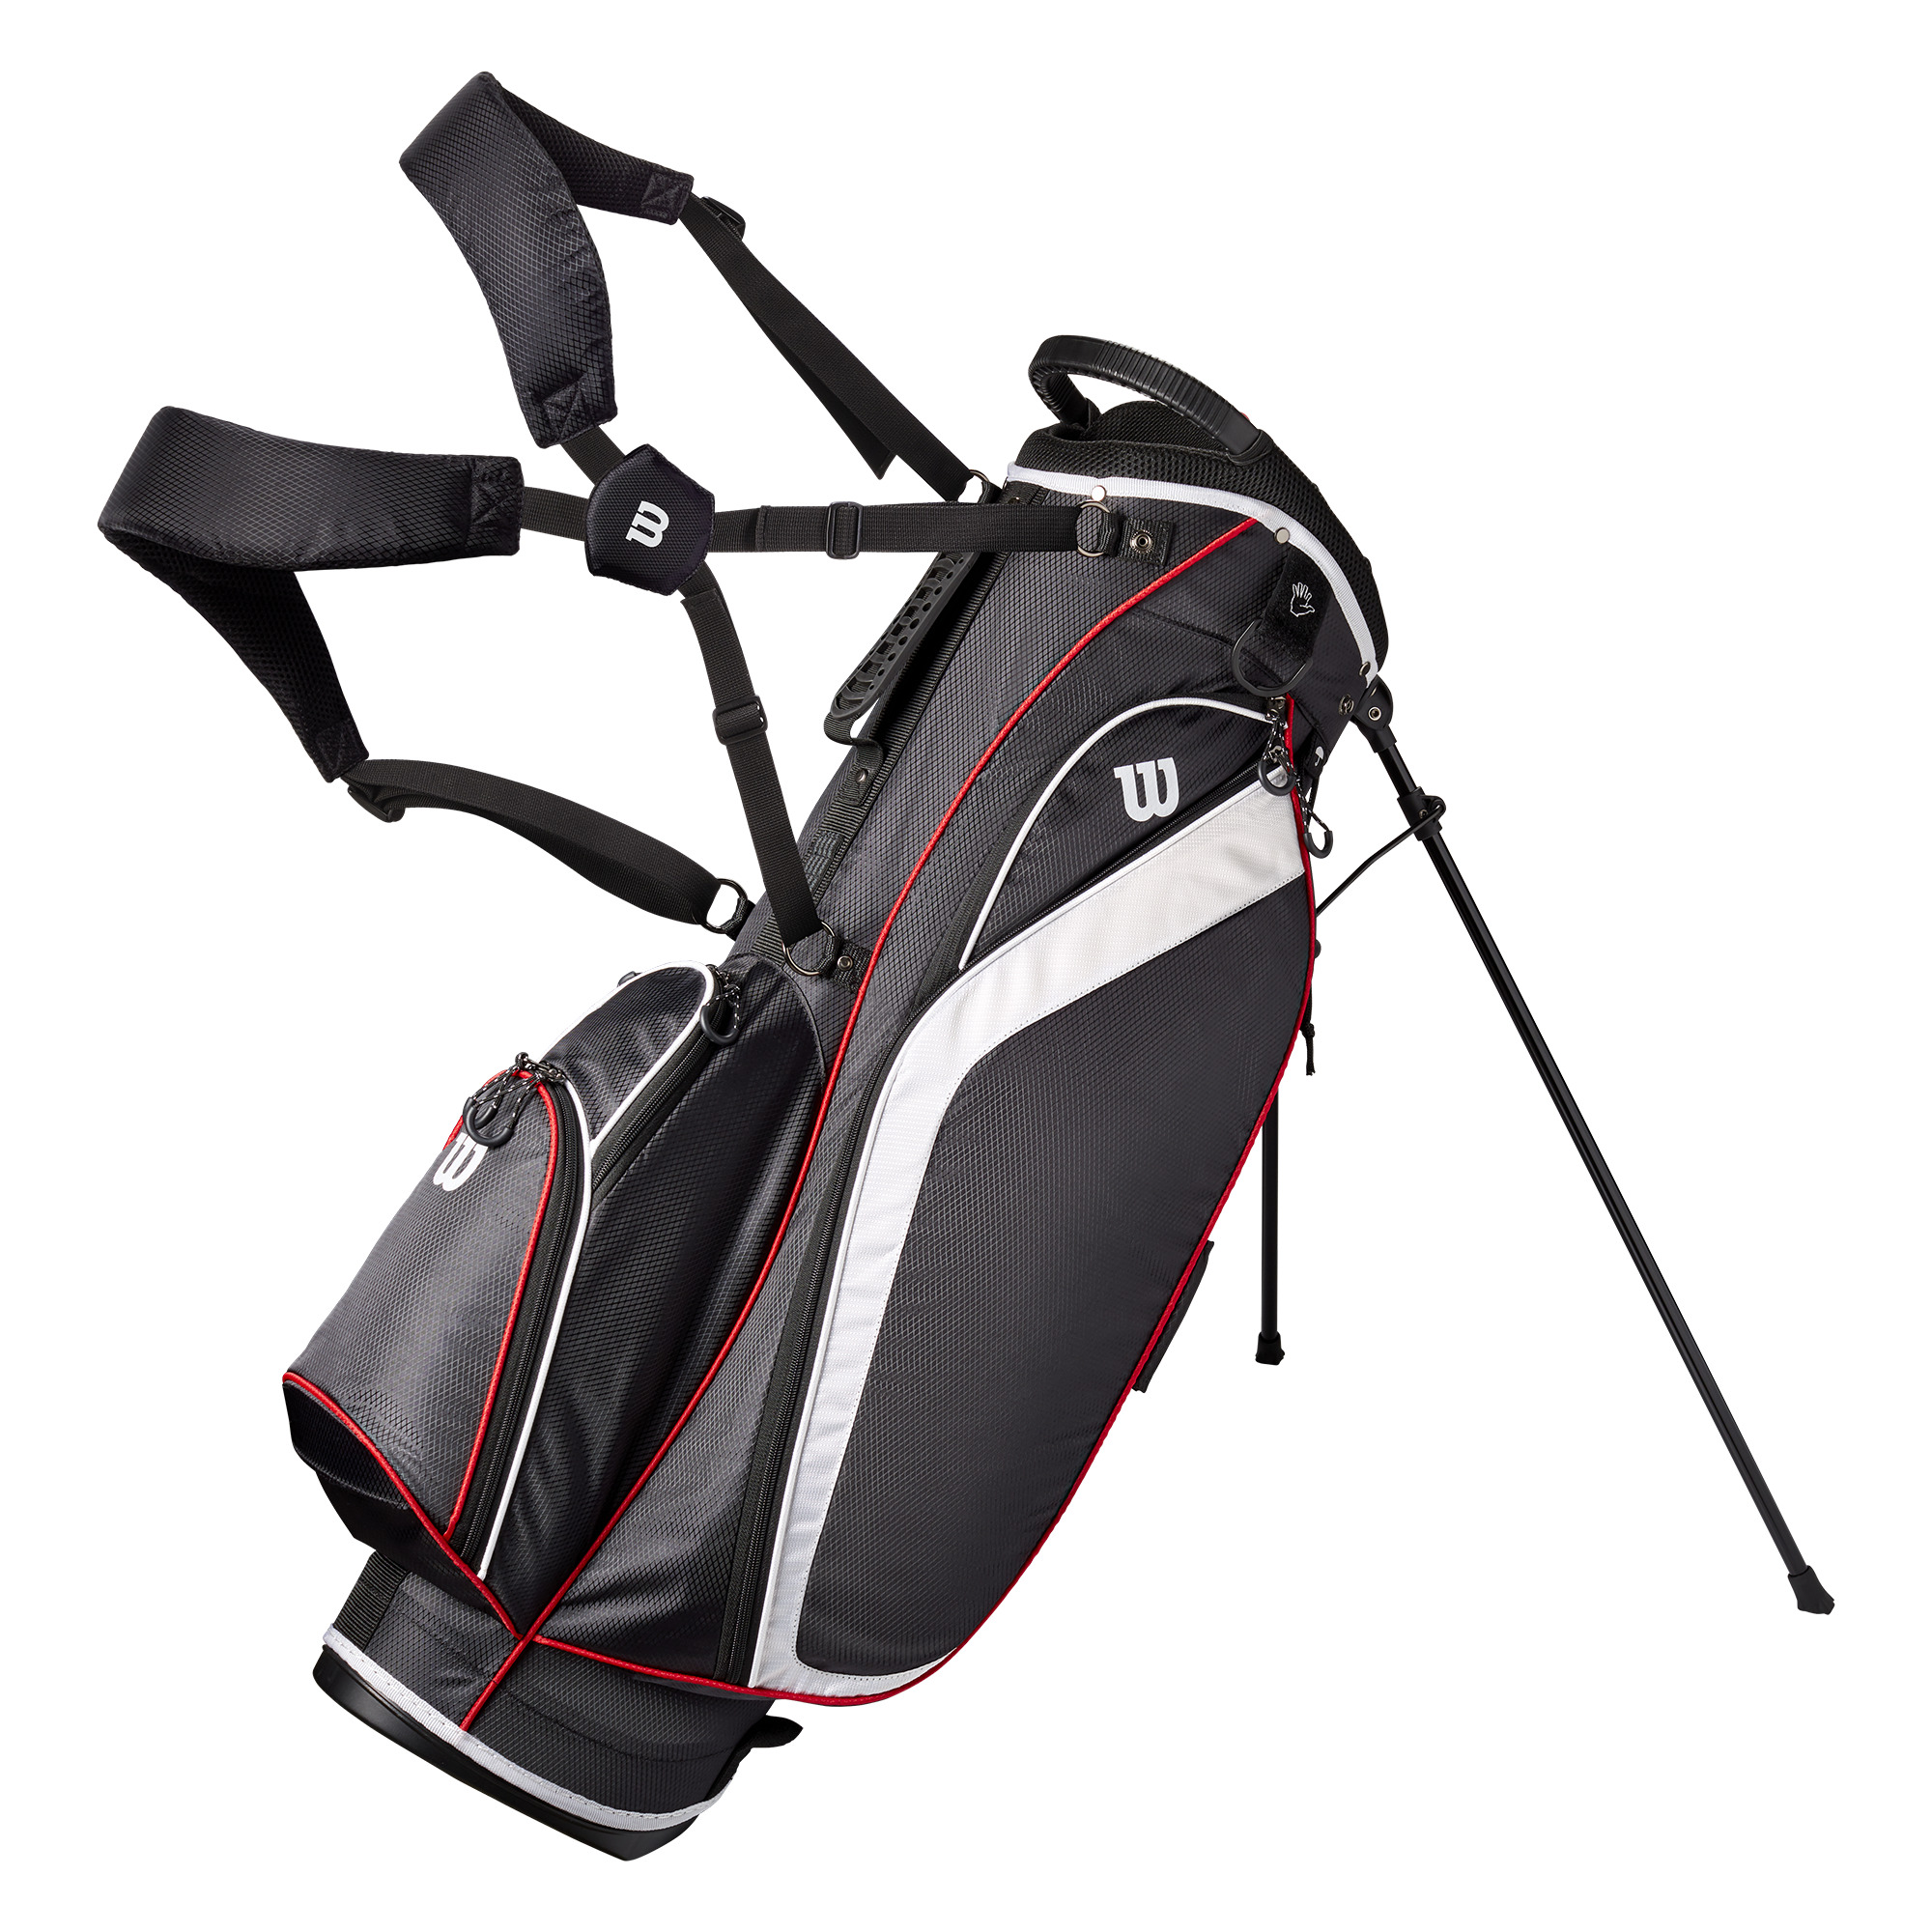 Wilson Stand Golf Bag, 6 Way Divider, Black/White/Red - image 1 of 6